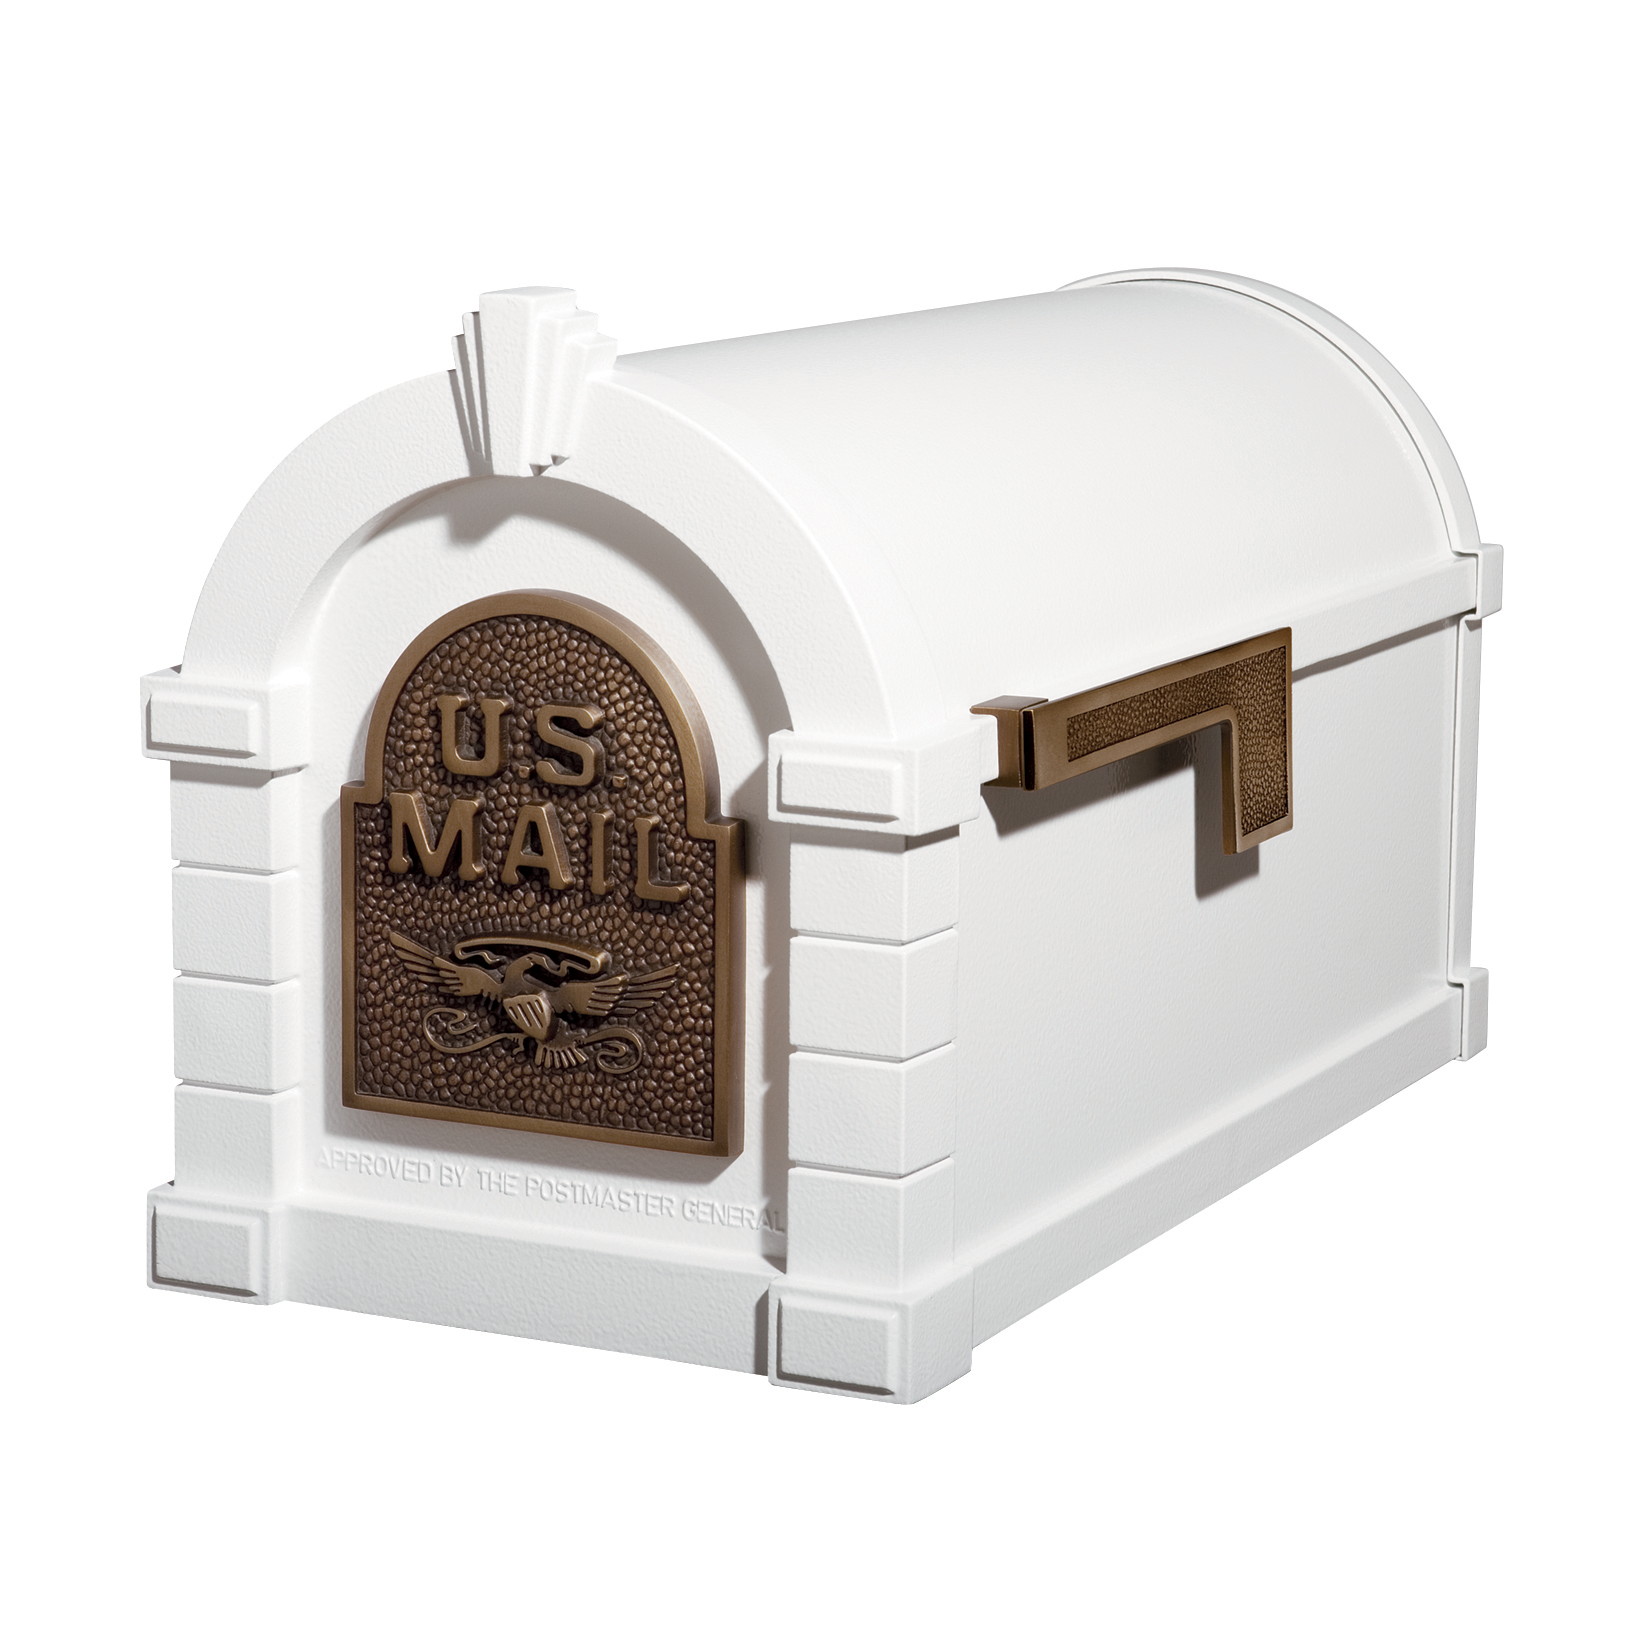 Gaines Eagle Keystone Mailboxes<br /> White with Antique Bronze